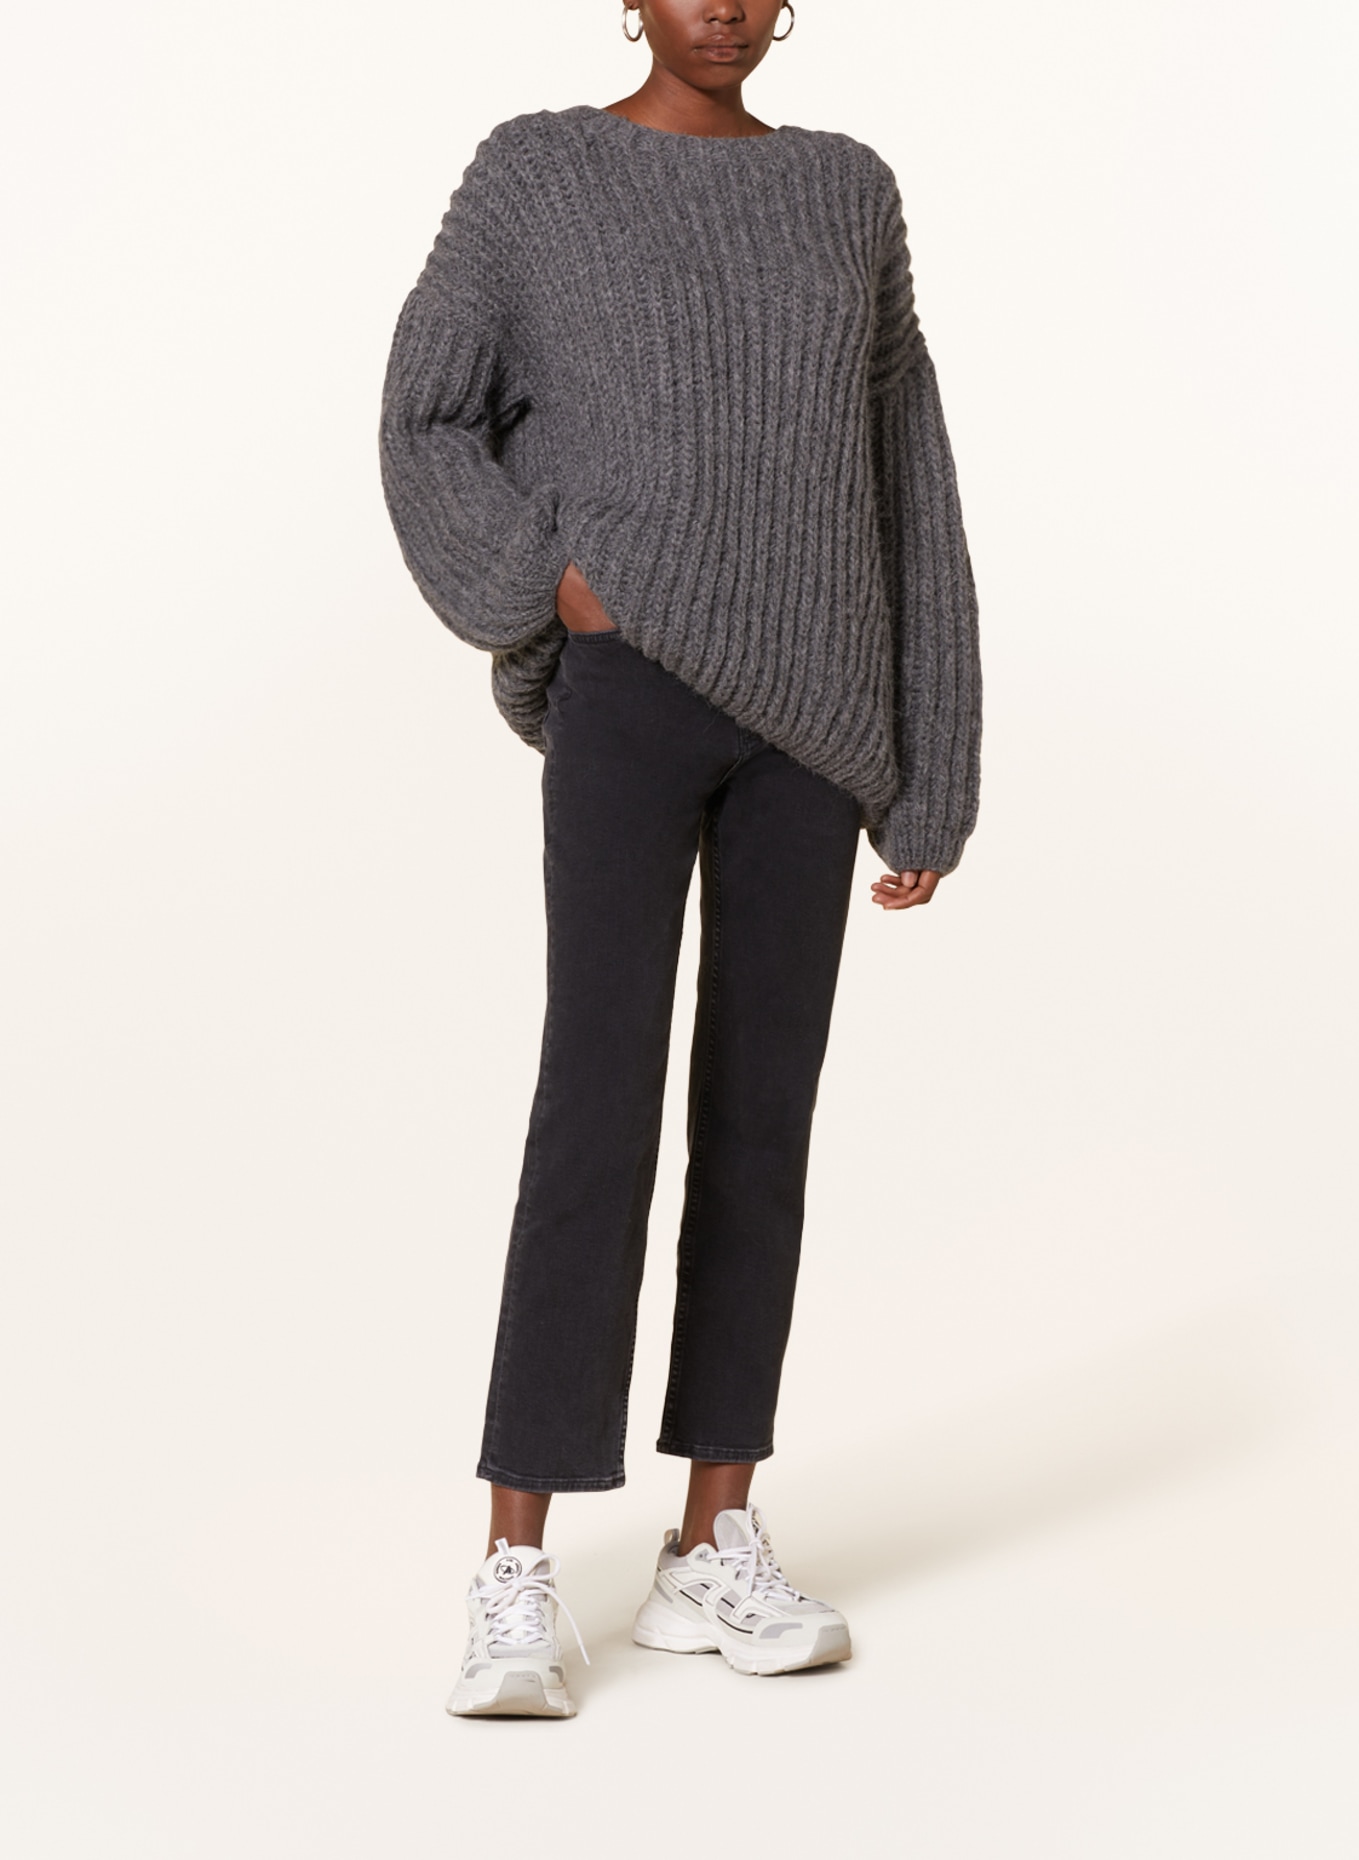 MAIAMI Oversized sweater made of alpaca, Color: GRAY (Image 2)